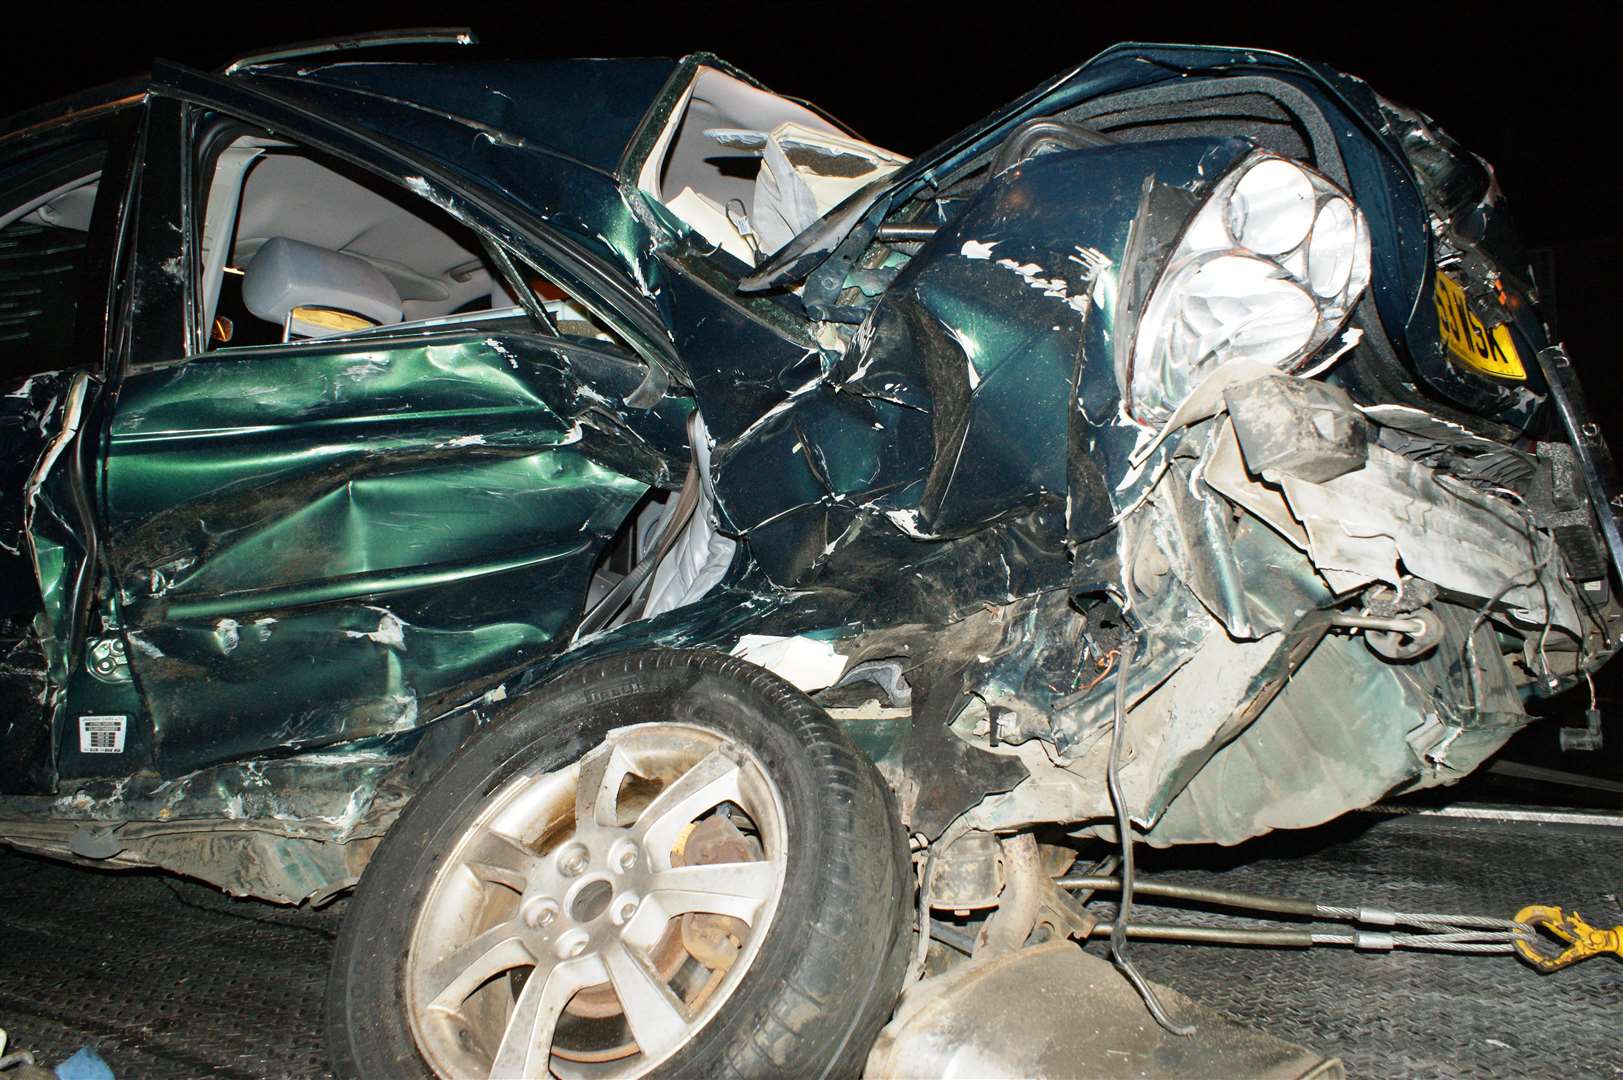 A Jaguar X-type was one of the ruined cars.